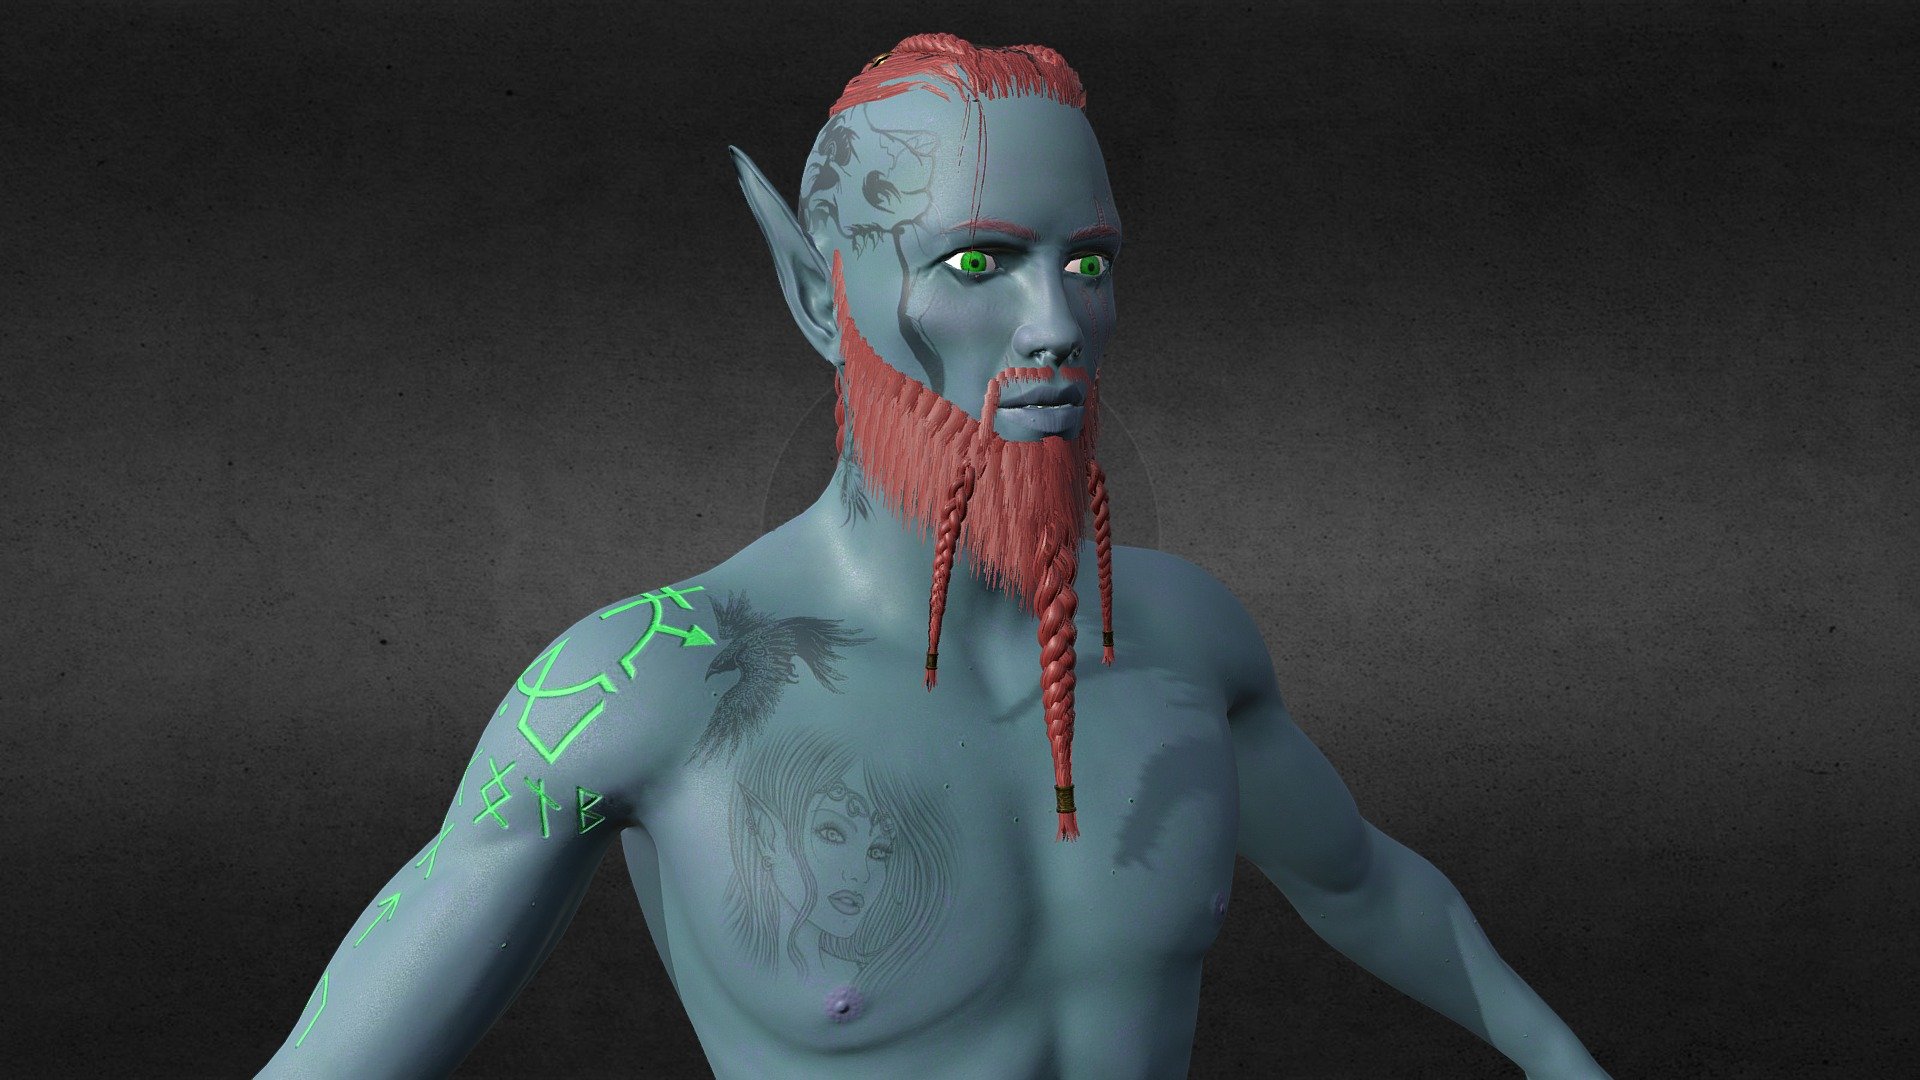 Main character for a game I want to make, just finished the character and hair, working on the first outfit next - Kitzo character with braid and beard - 3D model by TannerVanBurton 3d model